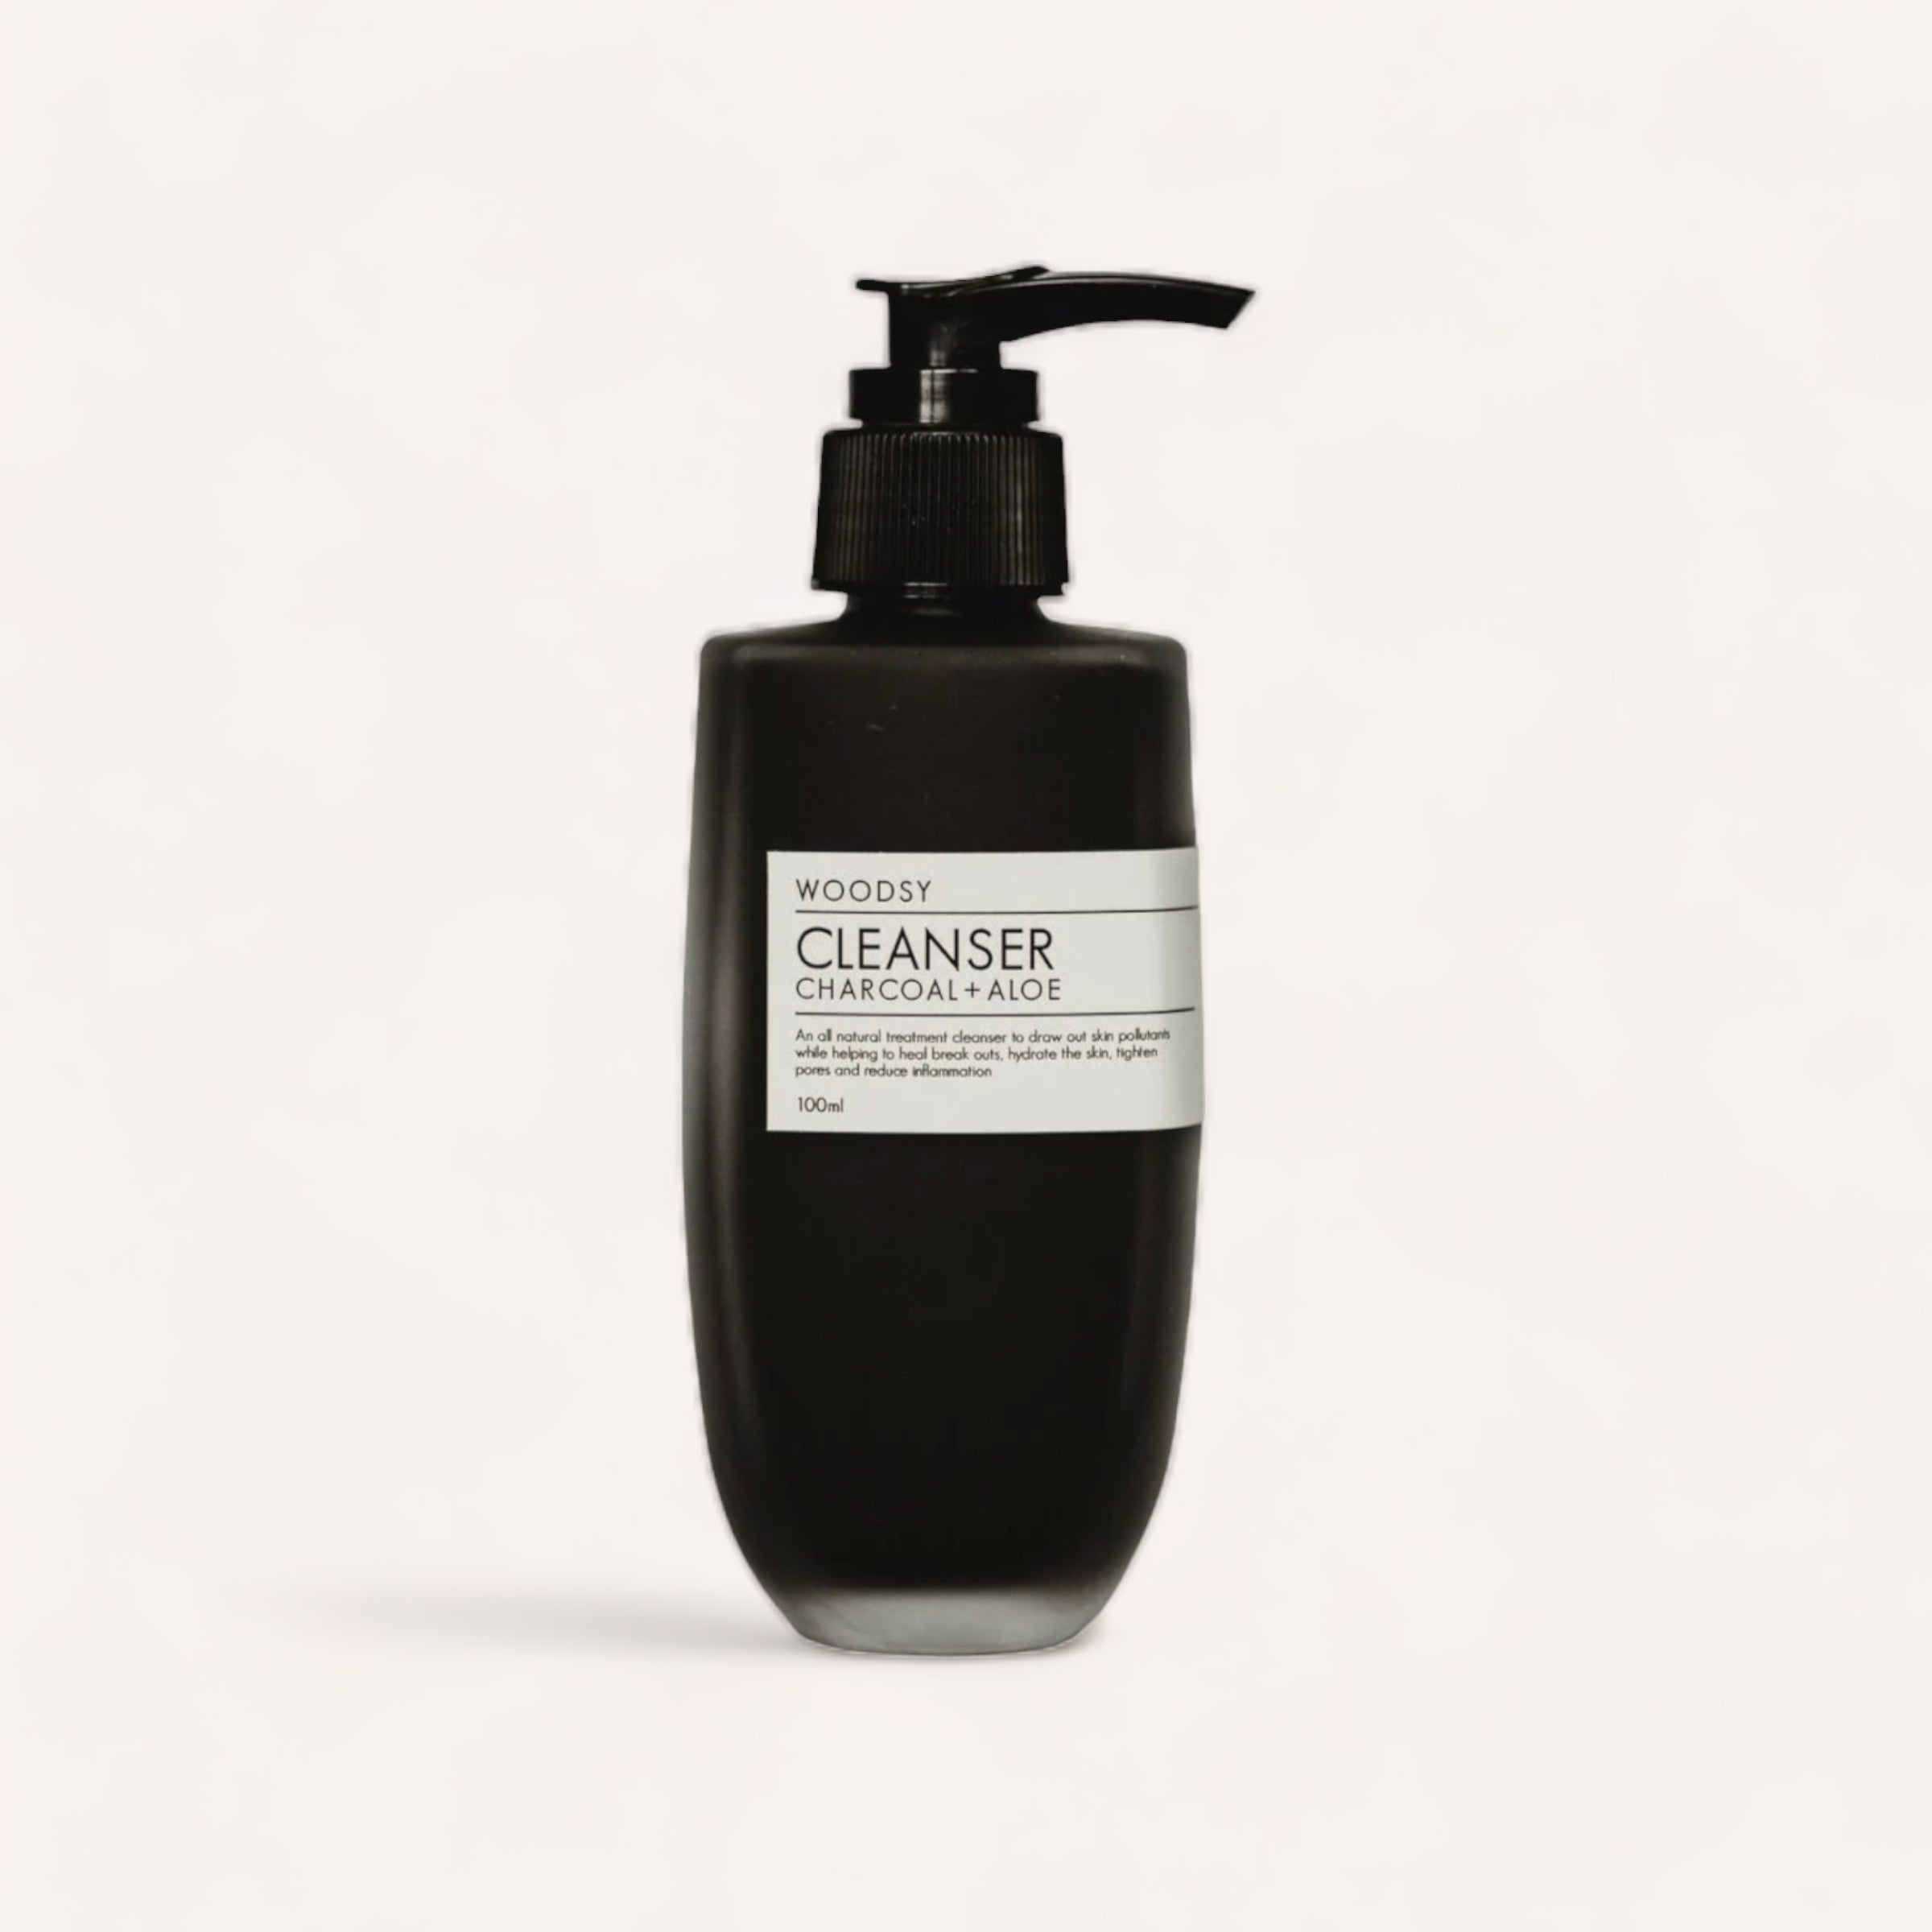 A black pump bottle of Cleanser - Charcoal & Aloe by Woodsy Botanics, presented against a clean white background.